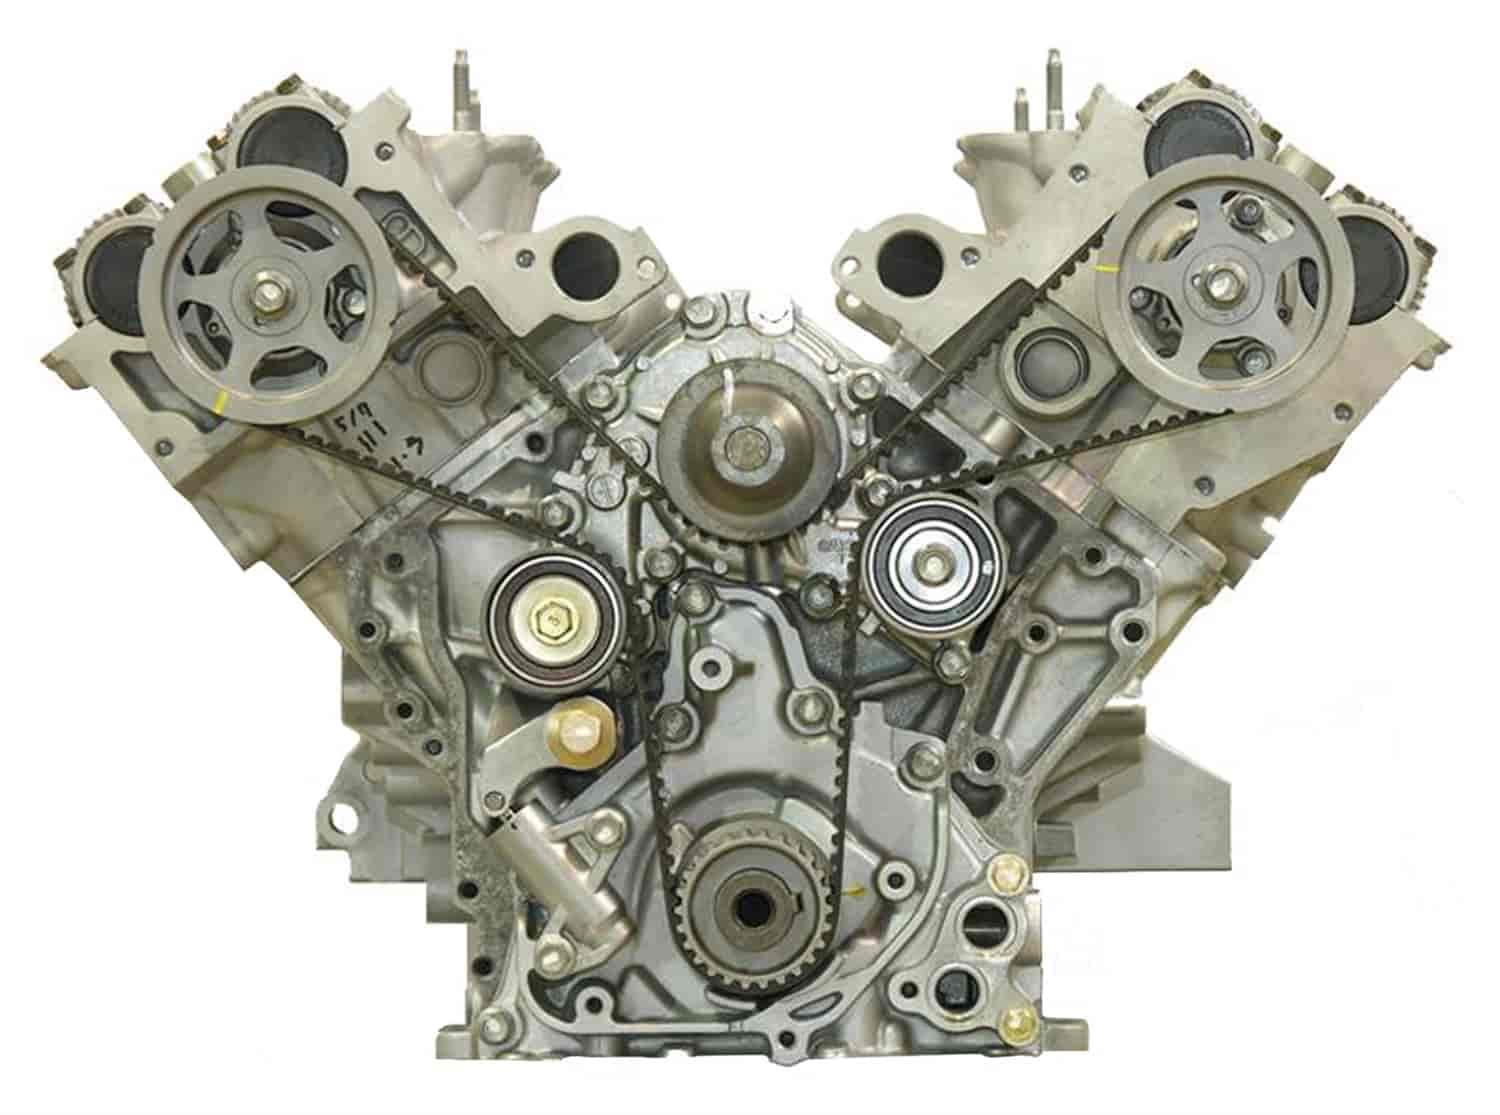 Remanufactured Crate Engine for 1998-2003 Isuzu with 3.5L